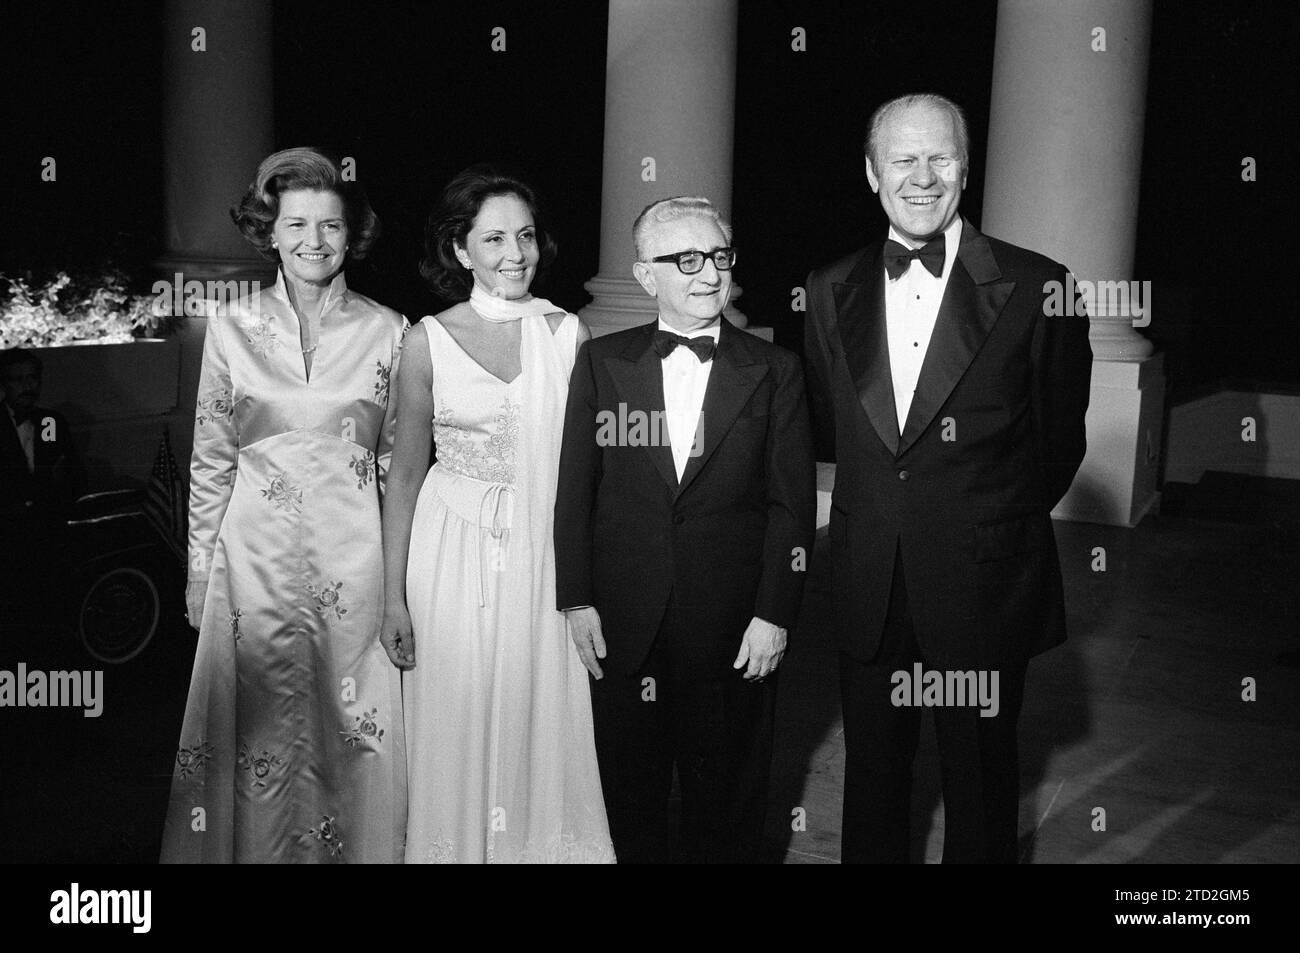 U.S. President Gerald Ford, First Lady Betty Ford, Italian President Giovanni Leone, and his wife Vittoria Michitto, attending White House dinner in honor of the Italian President, Washington, D.C., USA, Marion S. Trikosko, U.S. News & World Report Magazine Photograph Collection, September 25, 1974 Stock Photo